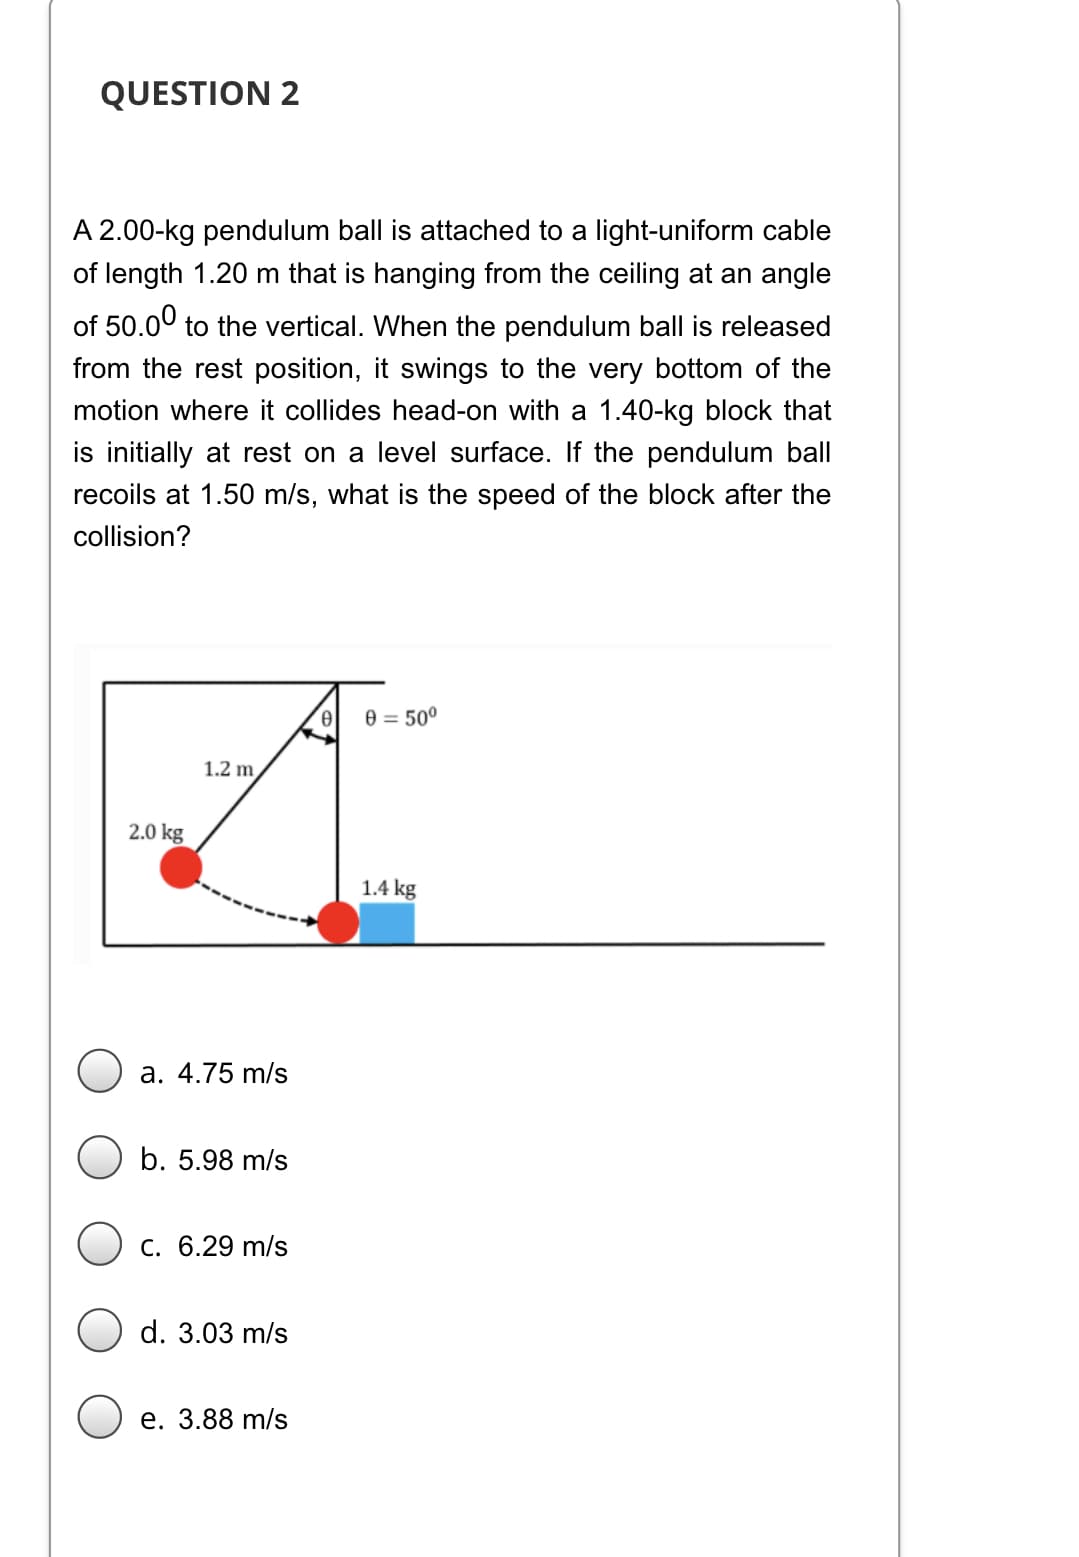 QUESTION 2
A 2.00-kg pendulum ball is attached to a light-uniform cable
of length 1.20 m that is hanging from the ceiling at an angle
of 50.00 to the vertical. When the pendulum ball is released
from the rest position, it swings to the very bottom of the
motion where it collides head-on with a 1.40-kg block that
is initially at rest on a level surface. If the pendulum ball
recoils at 1.50 m/s, what is the speed of the block after the
collision?
e = 50°
1.2 m,
2.0 kg
1.4 kg
a. 4.75 m/s
b. 5.98 m/s
C. 6.29 m/s
d. 3.03 m/s
е. 3.88 m/s
